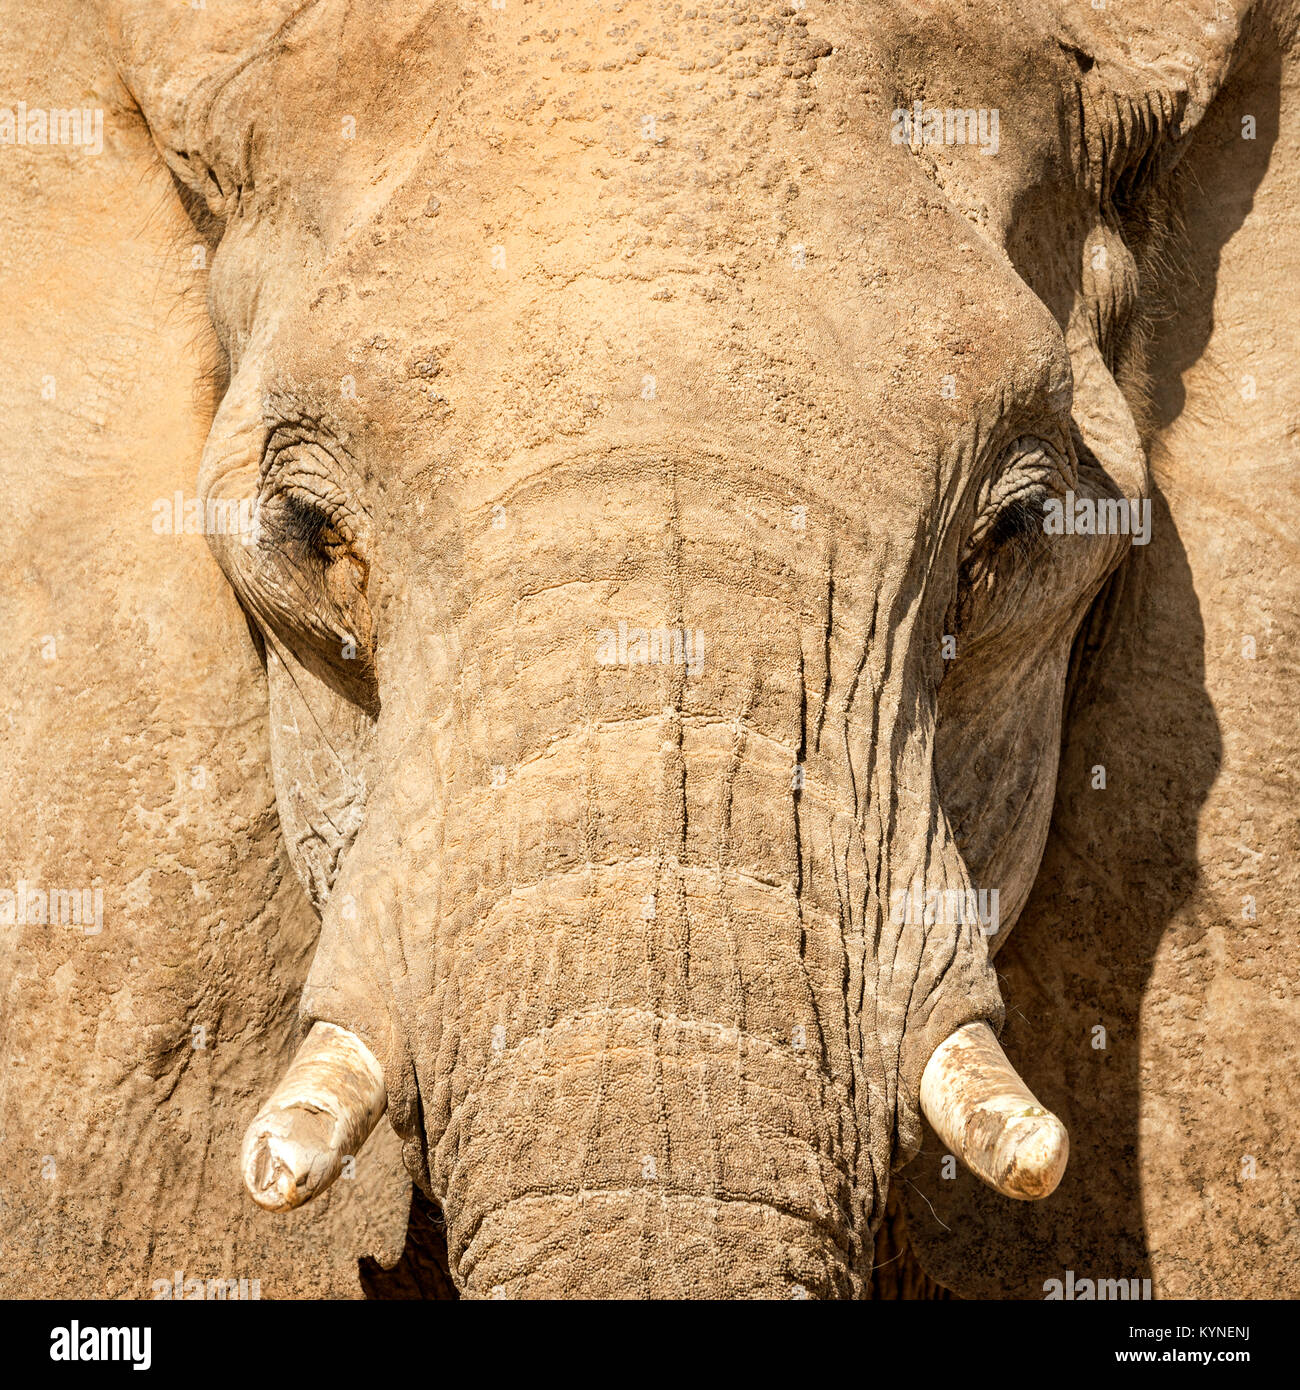 Close up of the head of an adult desert adapted elephant in Namibia. Stock Photo